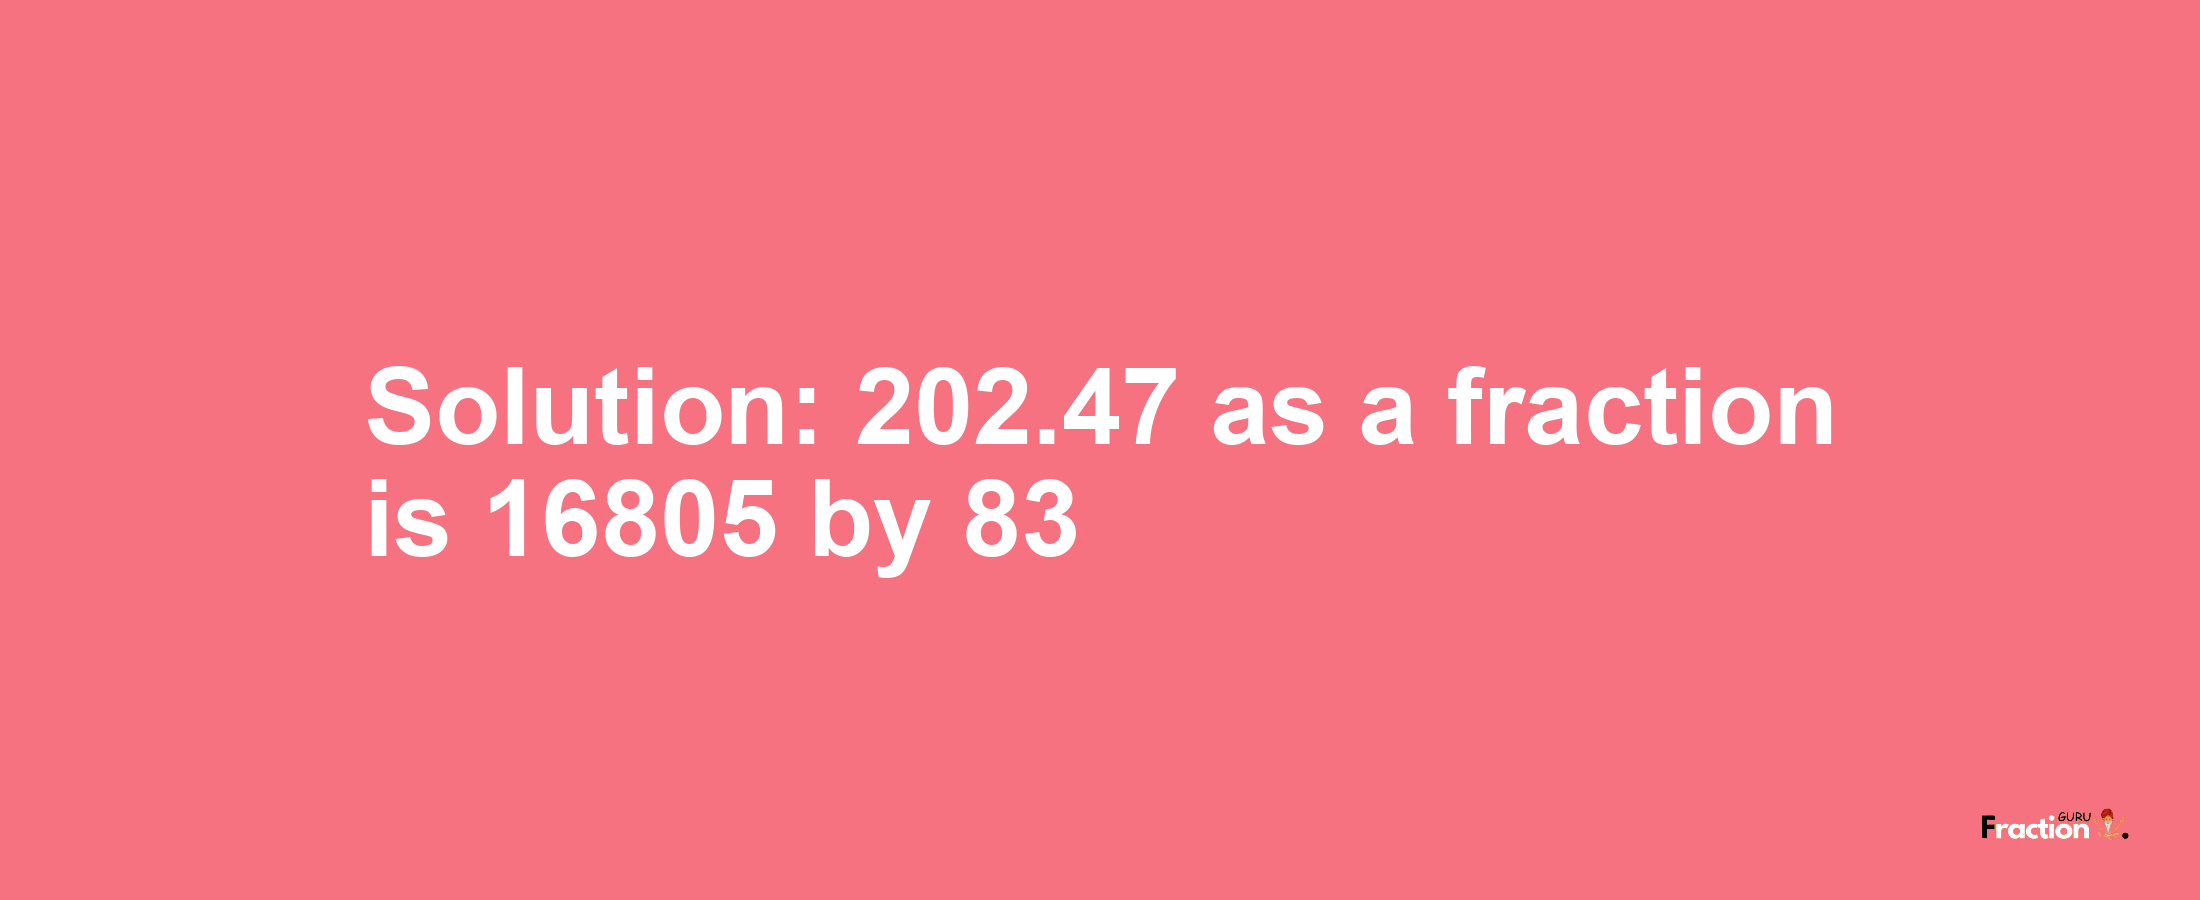 Solution:202.47 as a fraction is 16805/83